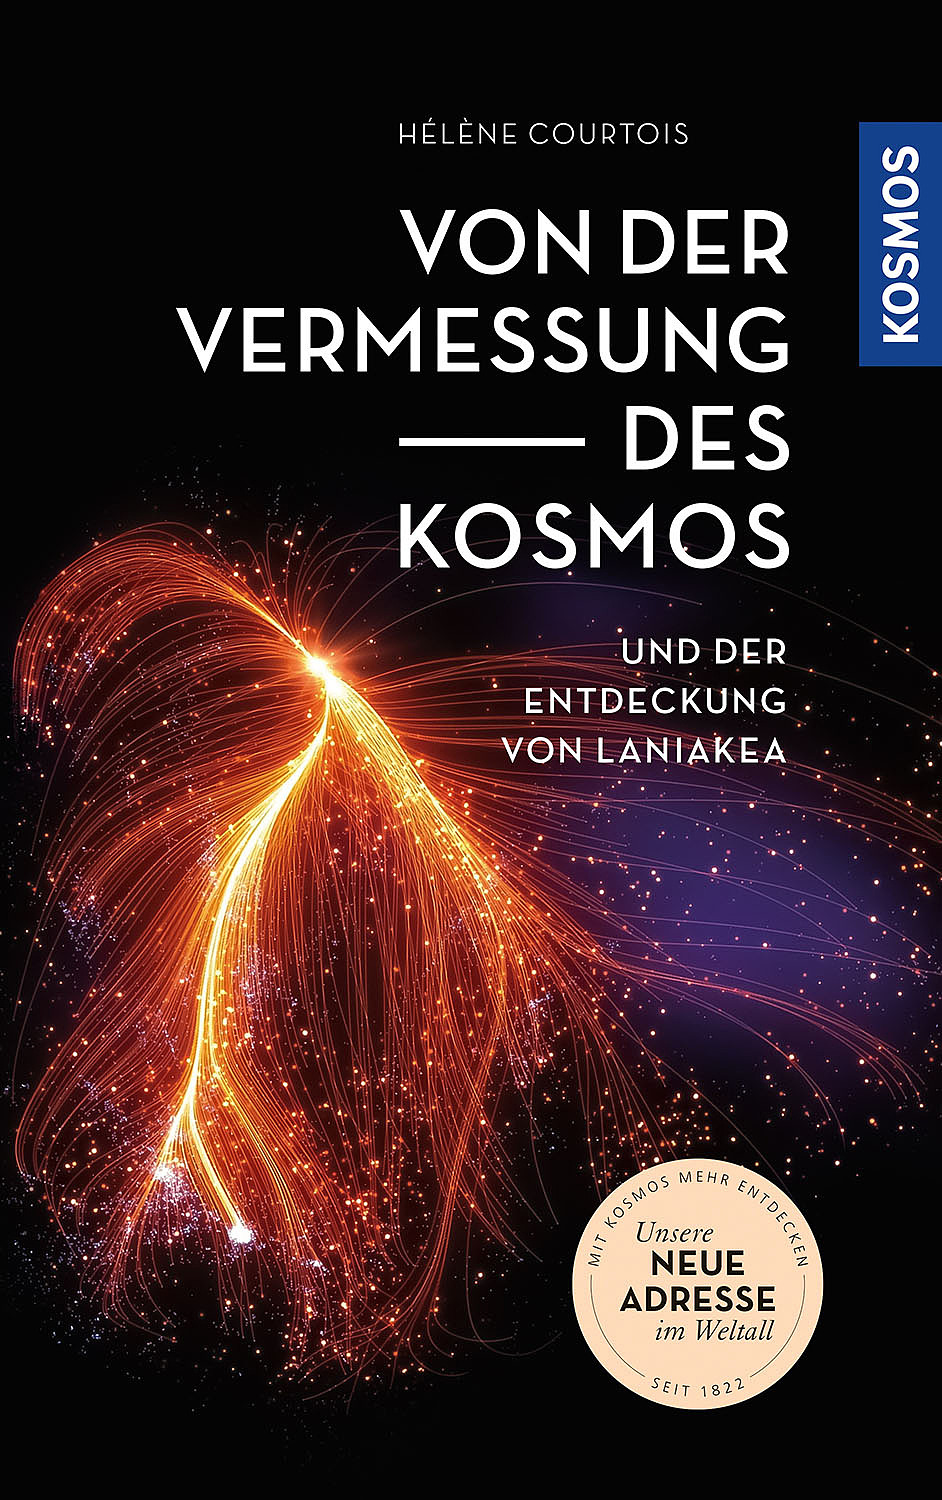 Book review “From the Measurement of the Universe”